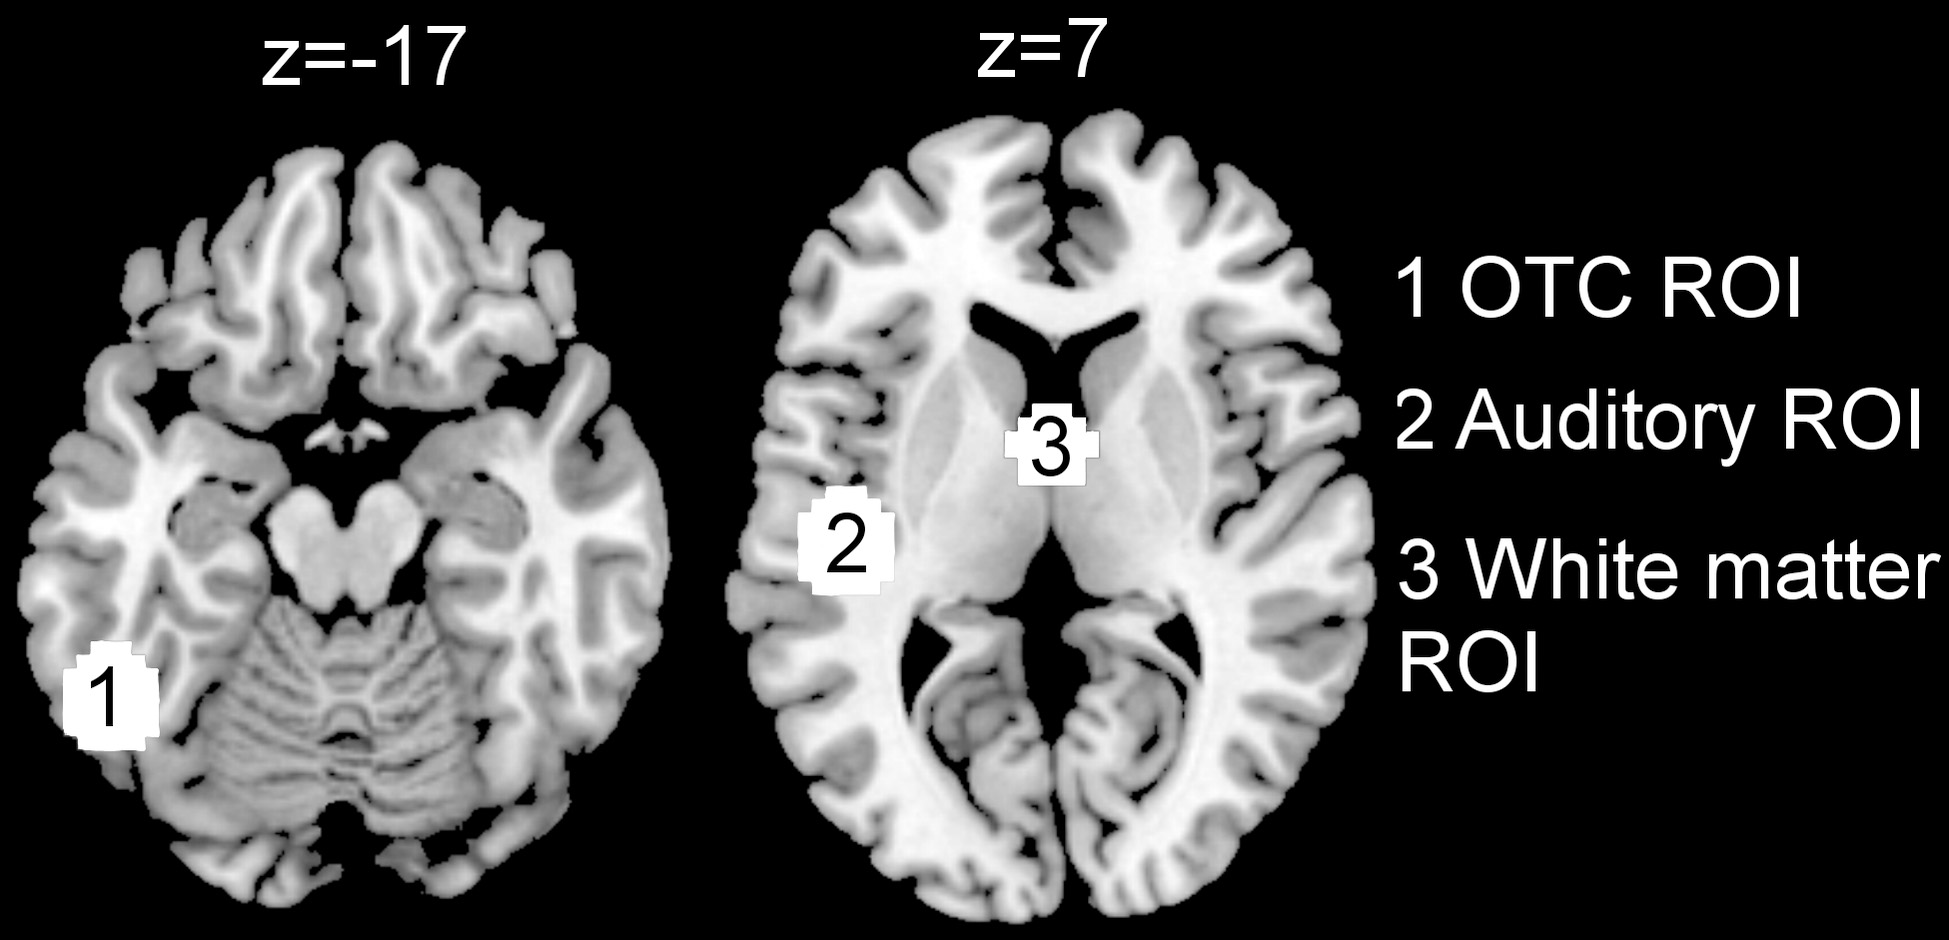 Regions of interest (ROI). ROIs are 12 mm-spheres centered at (-52, -53, -17) for the OTC ROI, (-45, -21, 7) for the Auditory ROI and (0, 0, 0) for the White matter ROI. Coordinates on the z-axis of the MNI space are provided above the corresponding horizontal brain sections. OTC: occipital-temporal cortex.